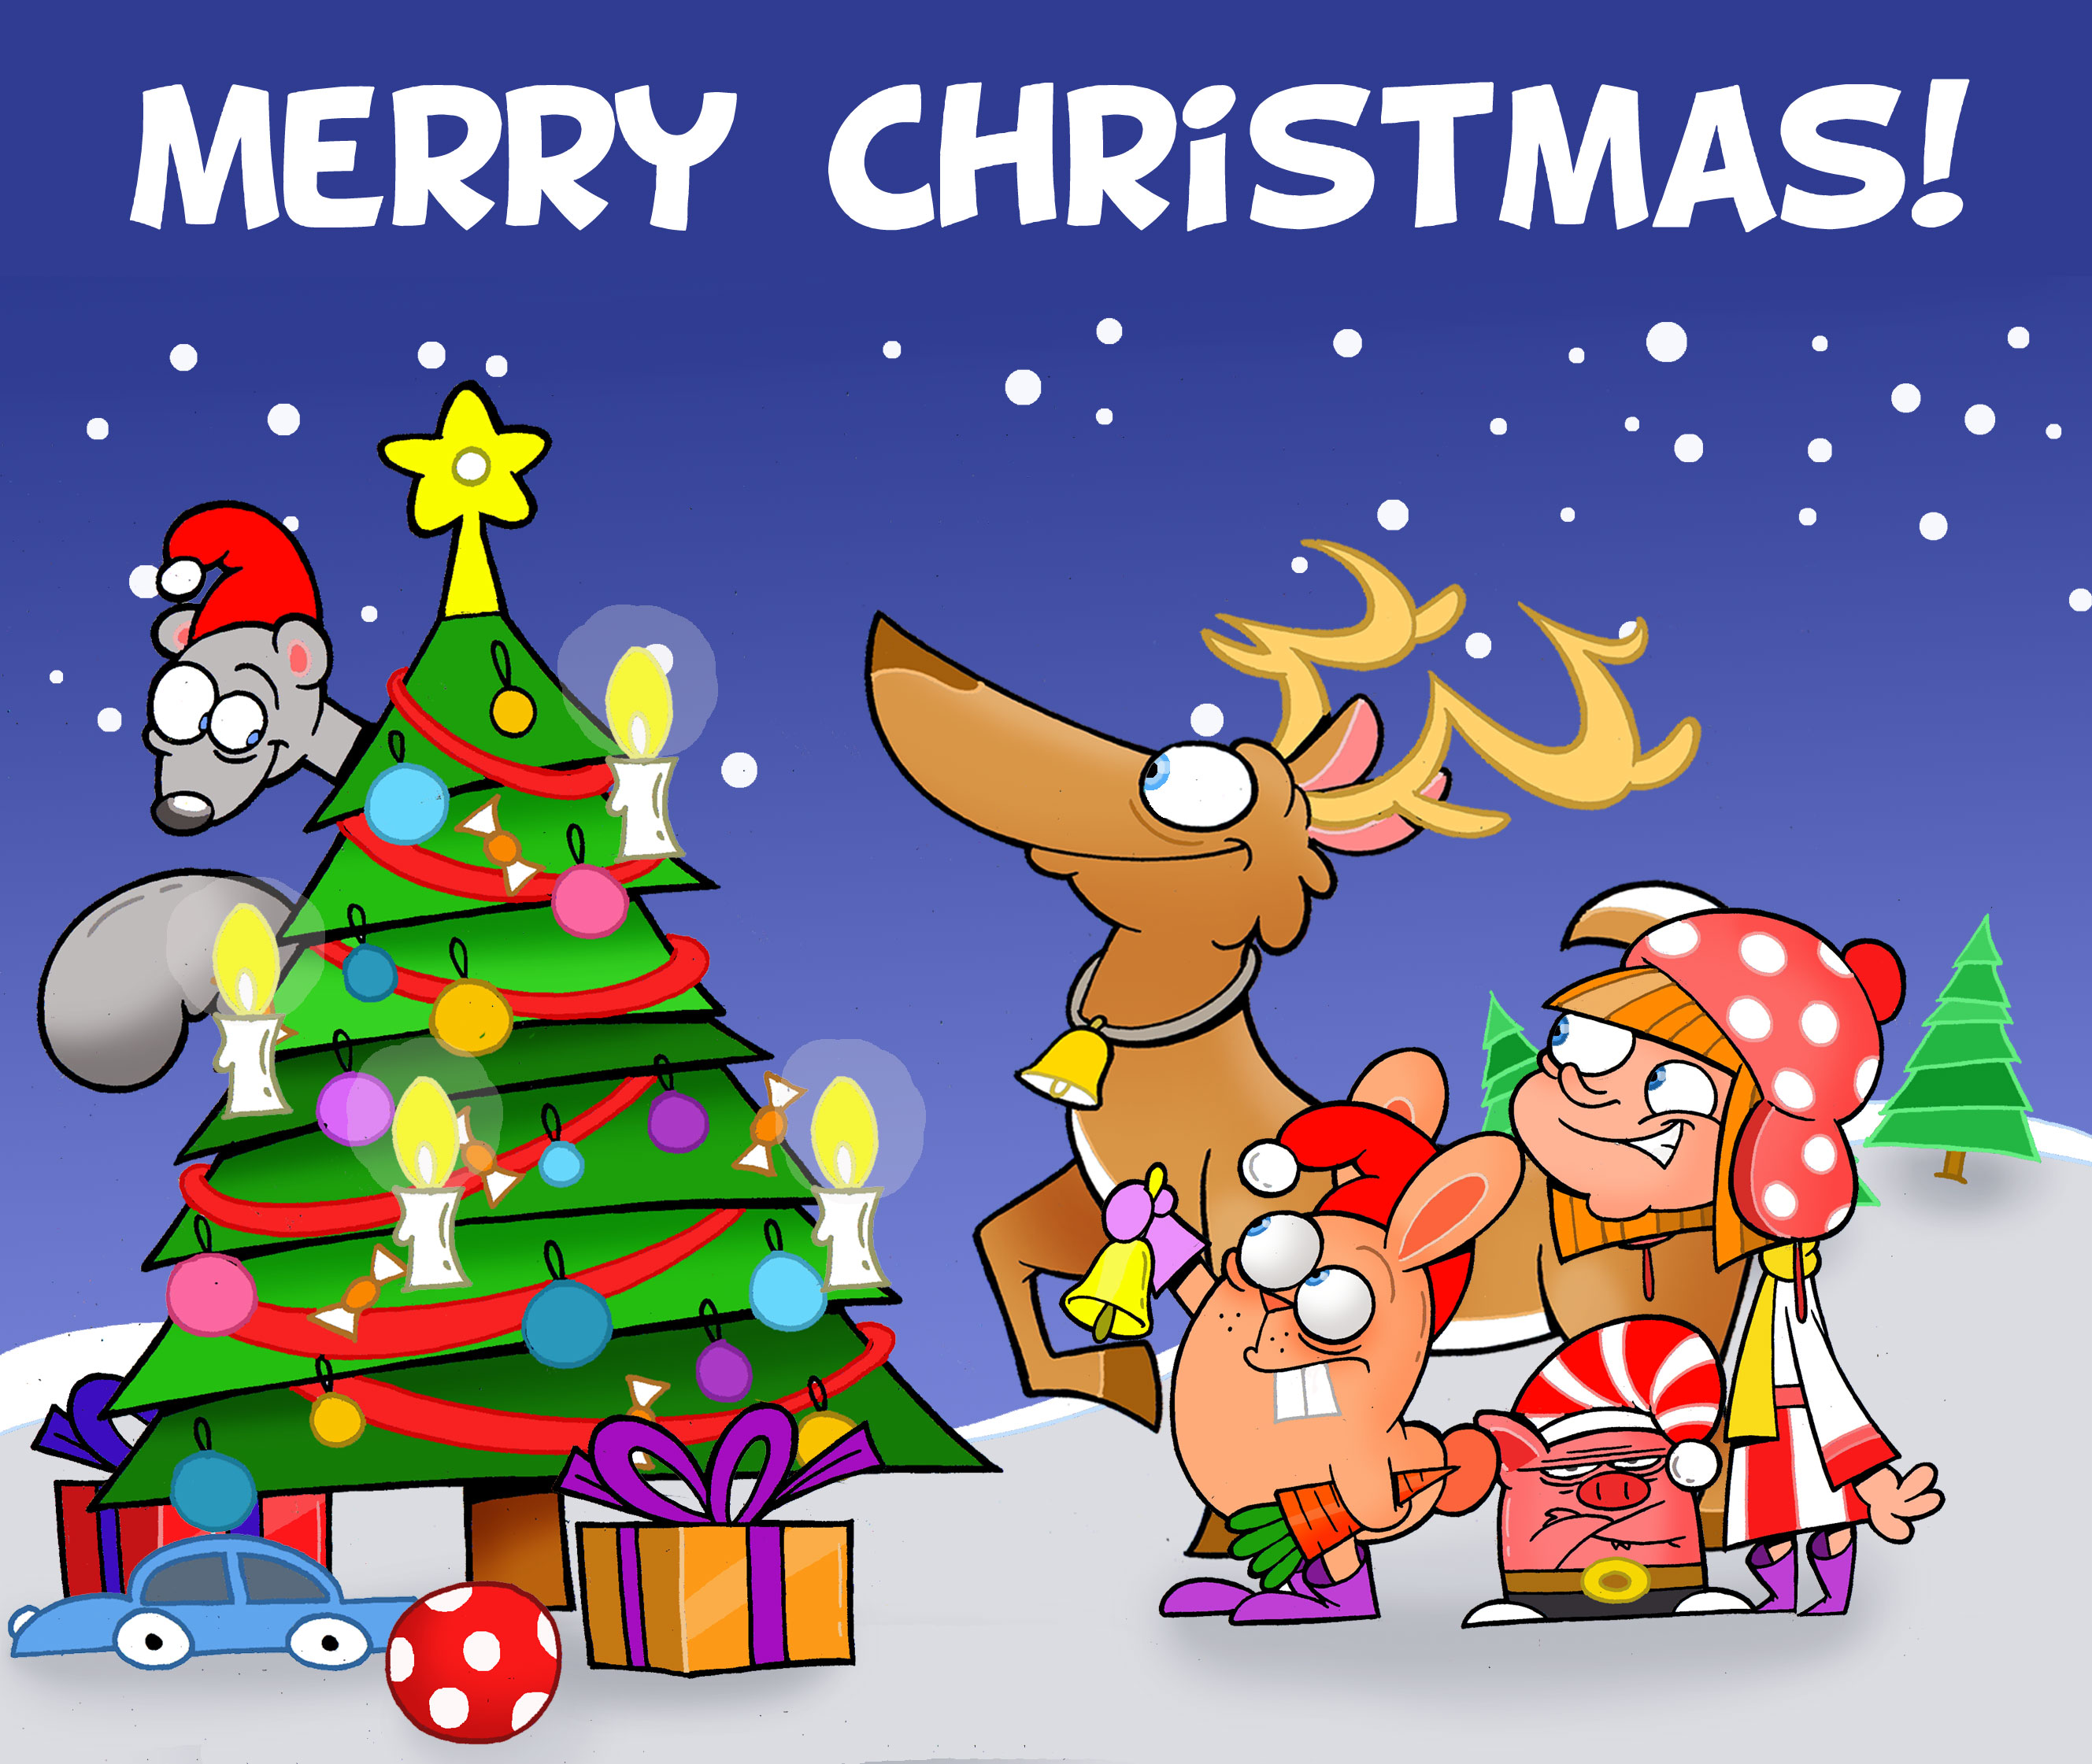 merry-christmas-free-illustration-my-gift-for-you-children-s-book